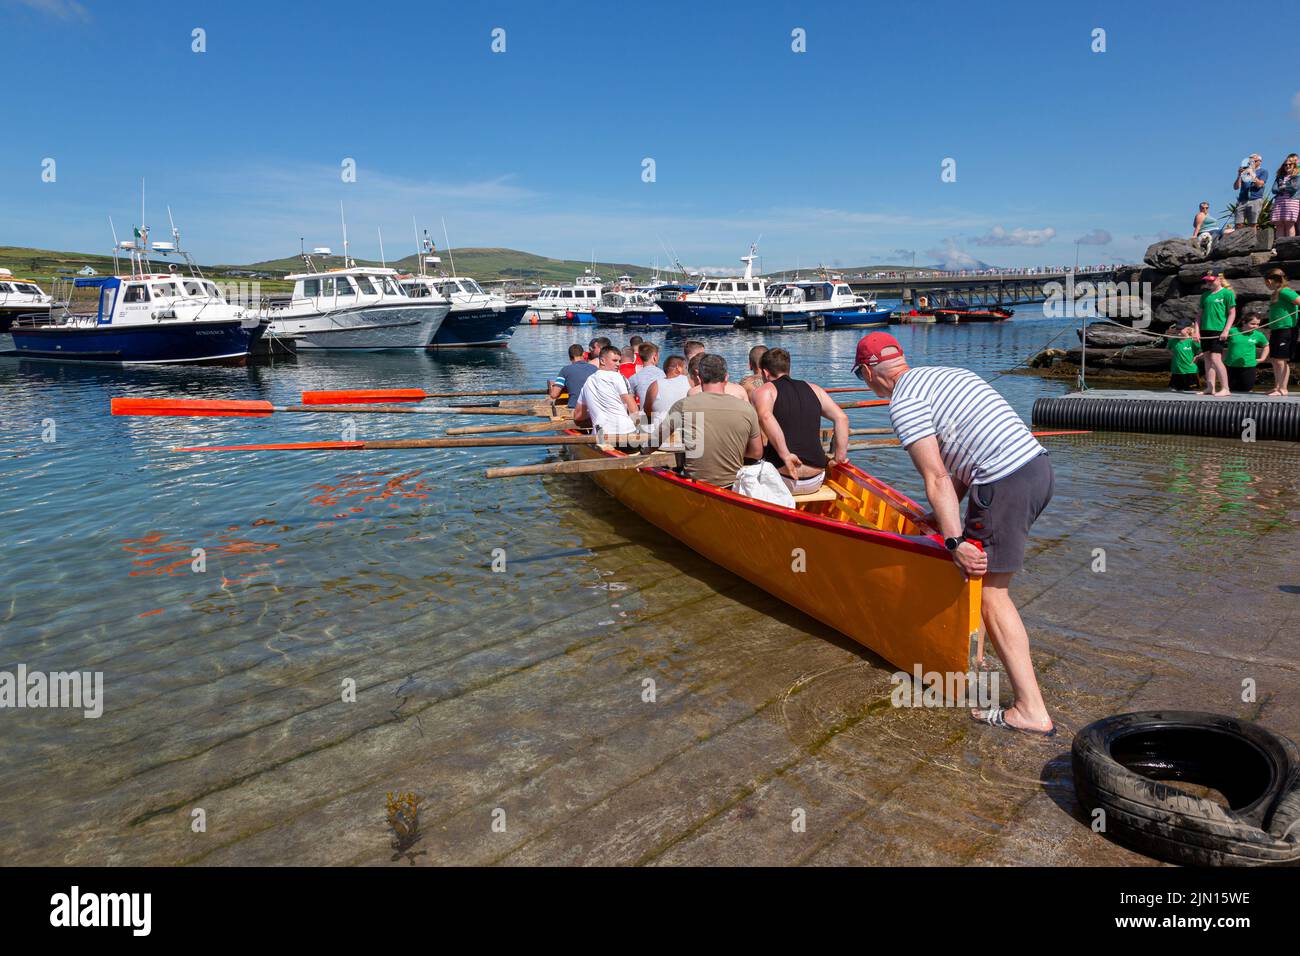 Seine Boat, traditional long fishing boat from County Kerry, at Portmagee Regatta Stock Photo